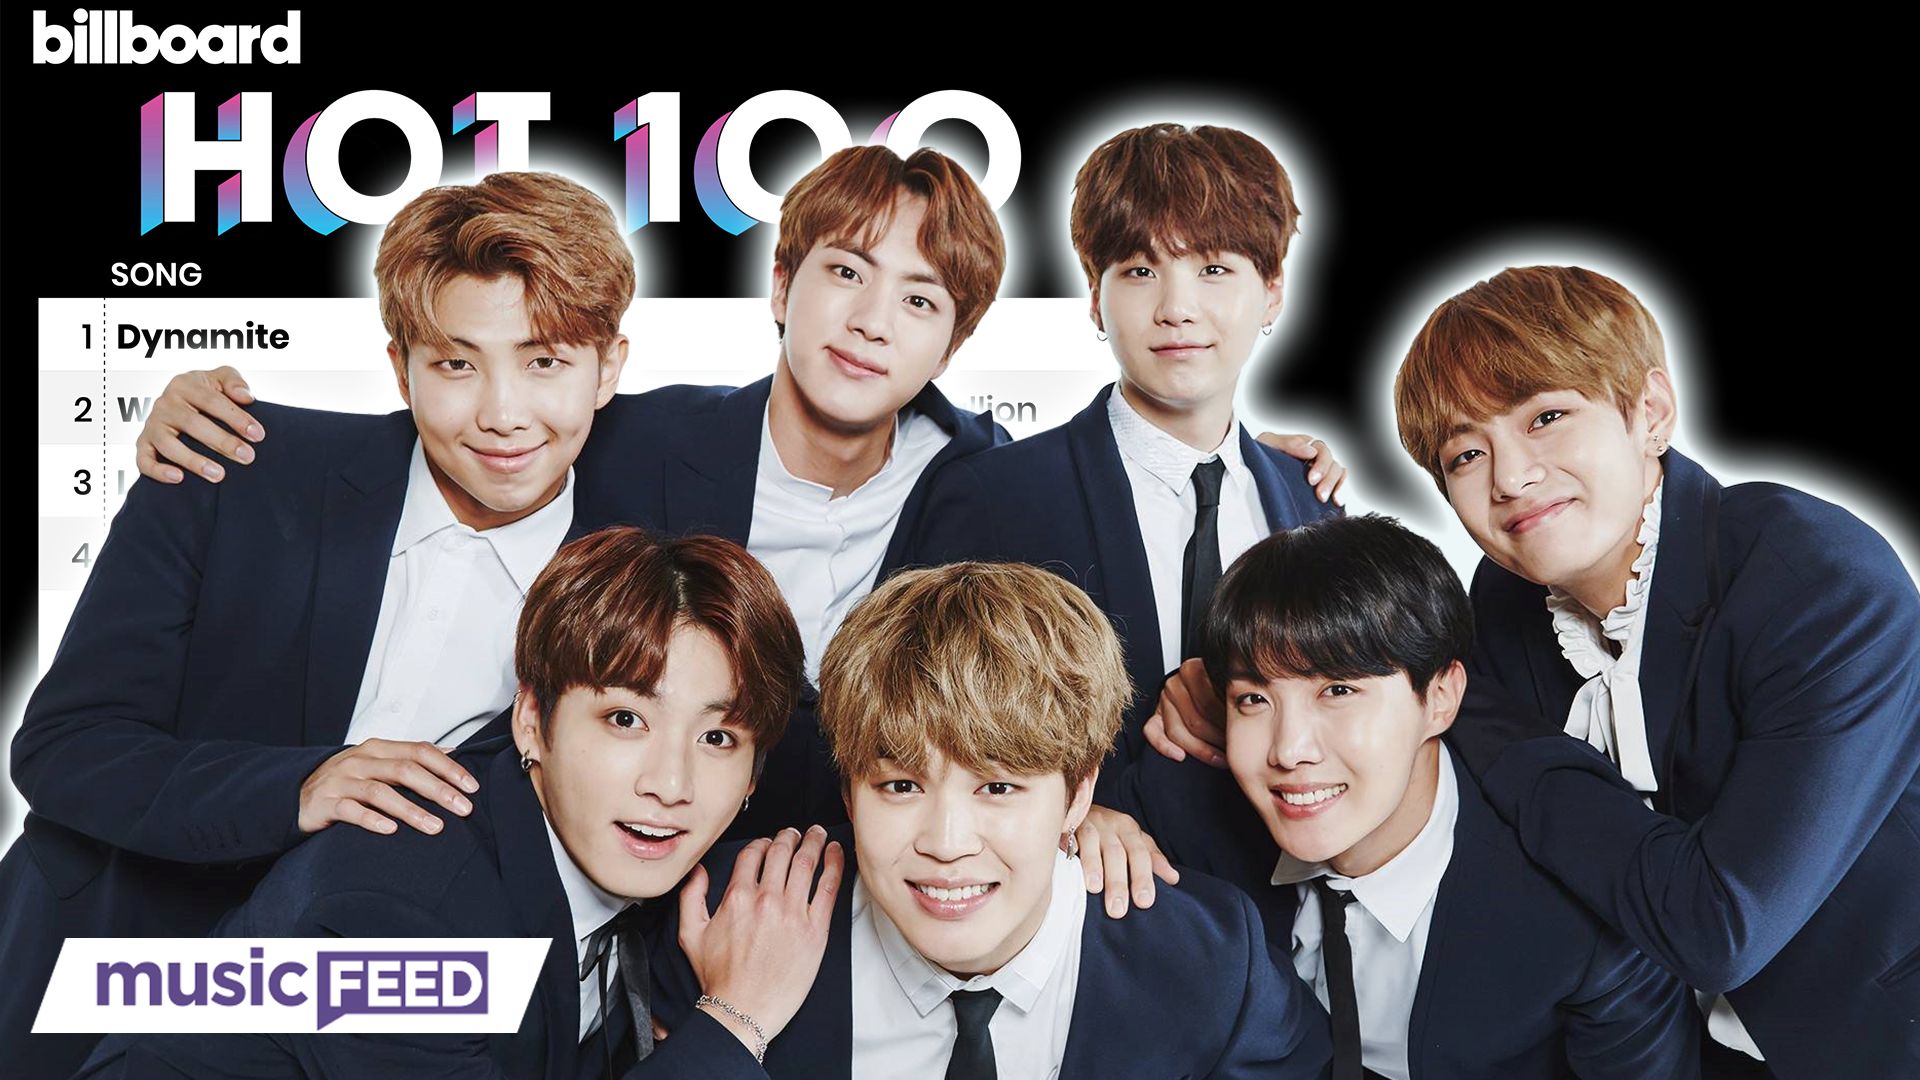 The Best Bts Songs To Dance To 2022